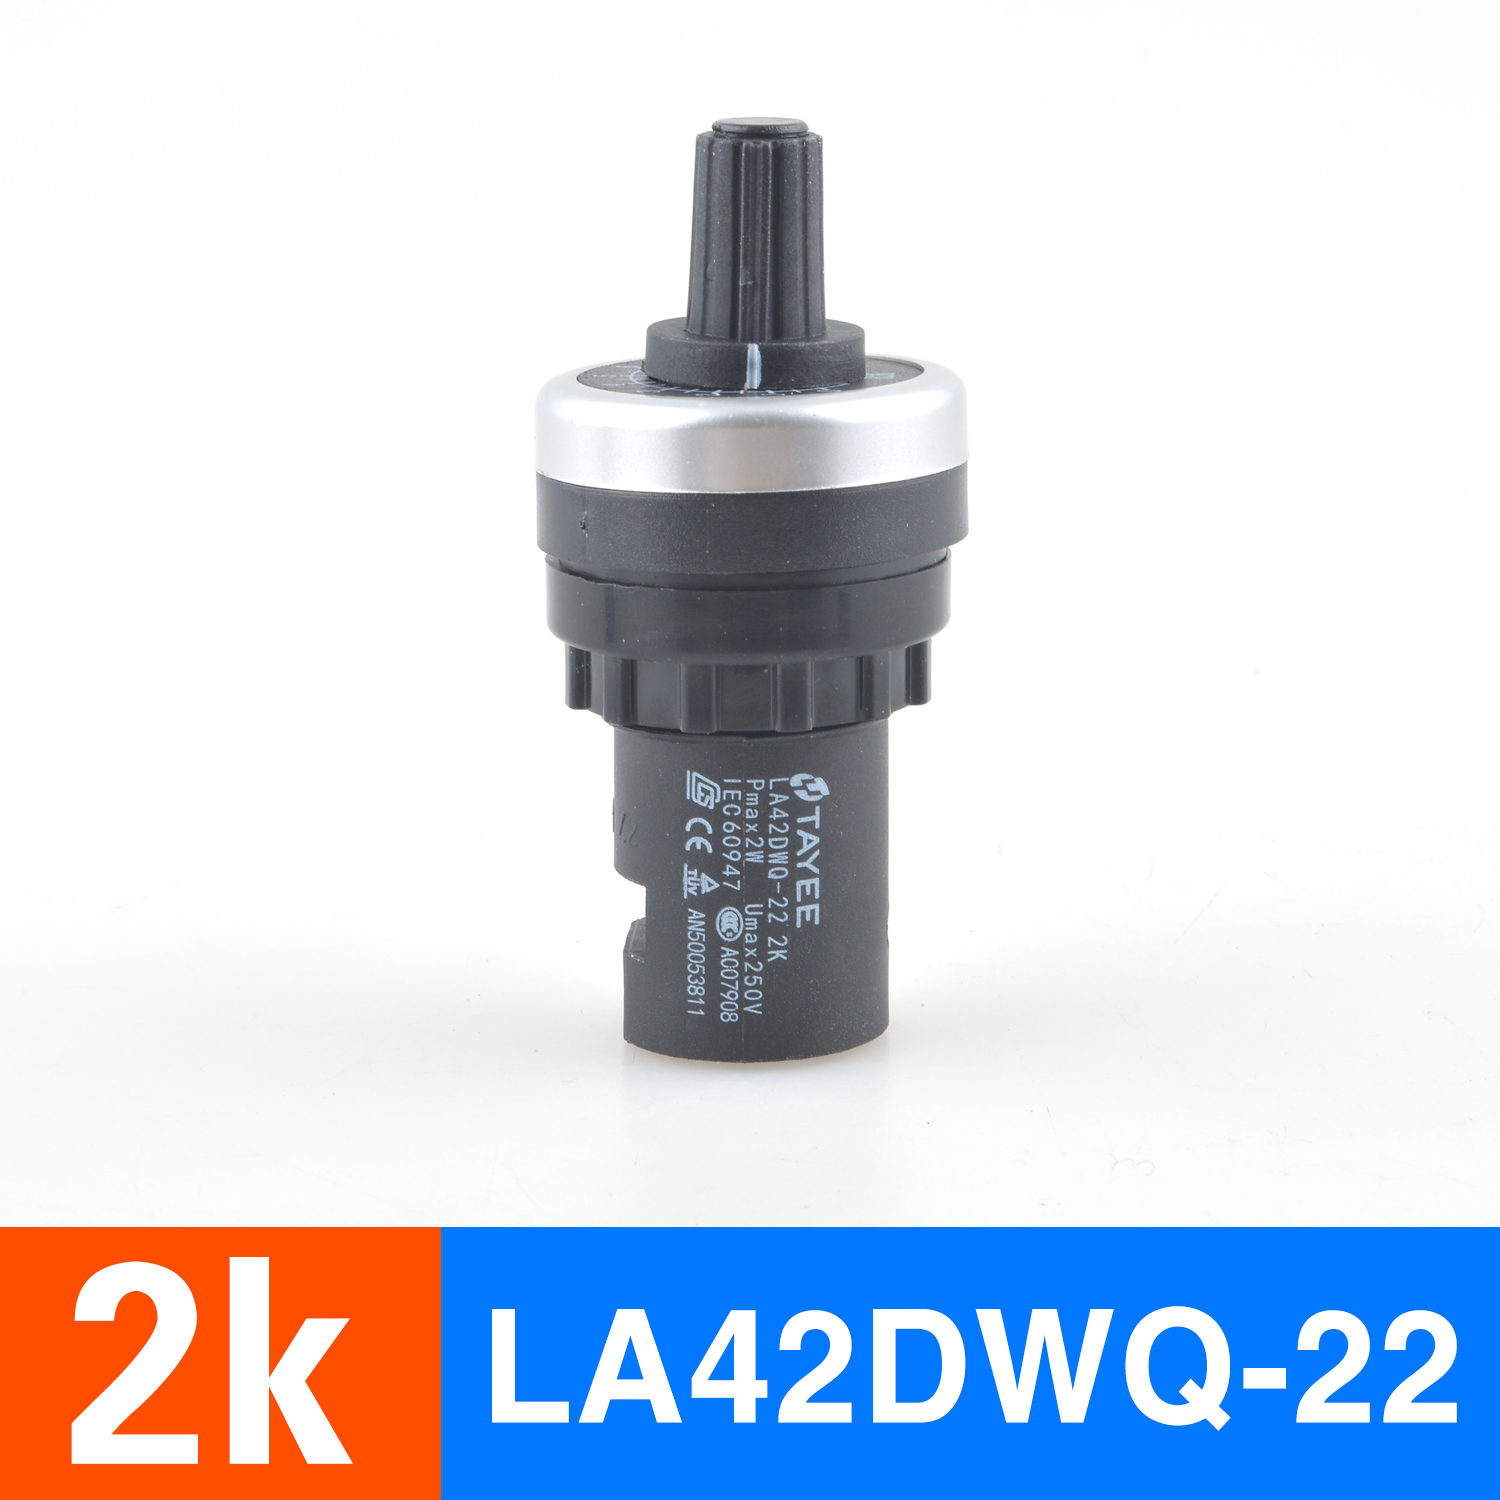 Genuine 2Kquality goods Shanghai Tianyi Frequency converter adjust speed potentiometer precise LA42DWQ-22 governor 22mm5K10K